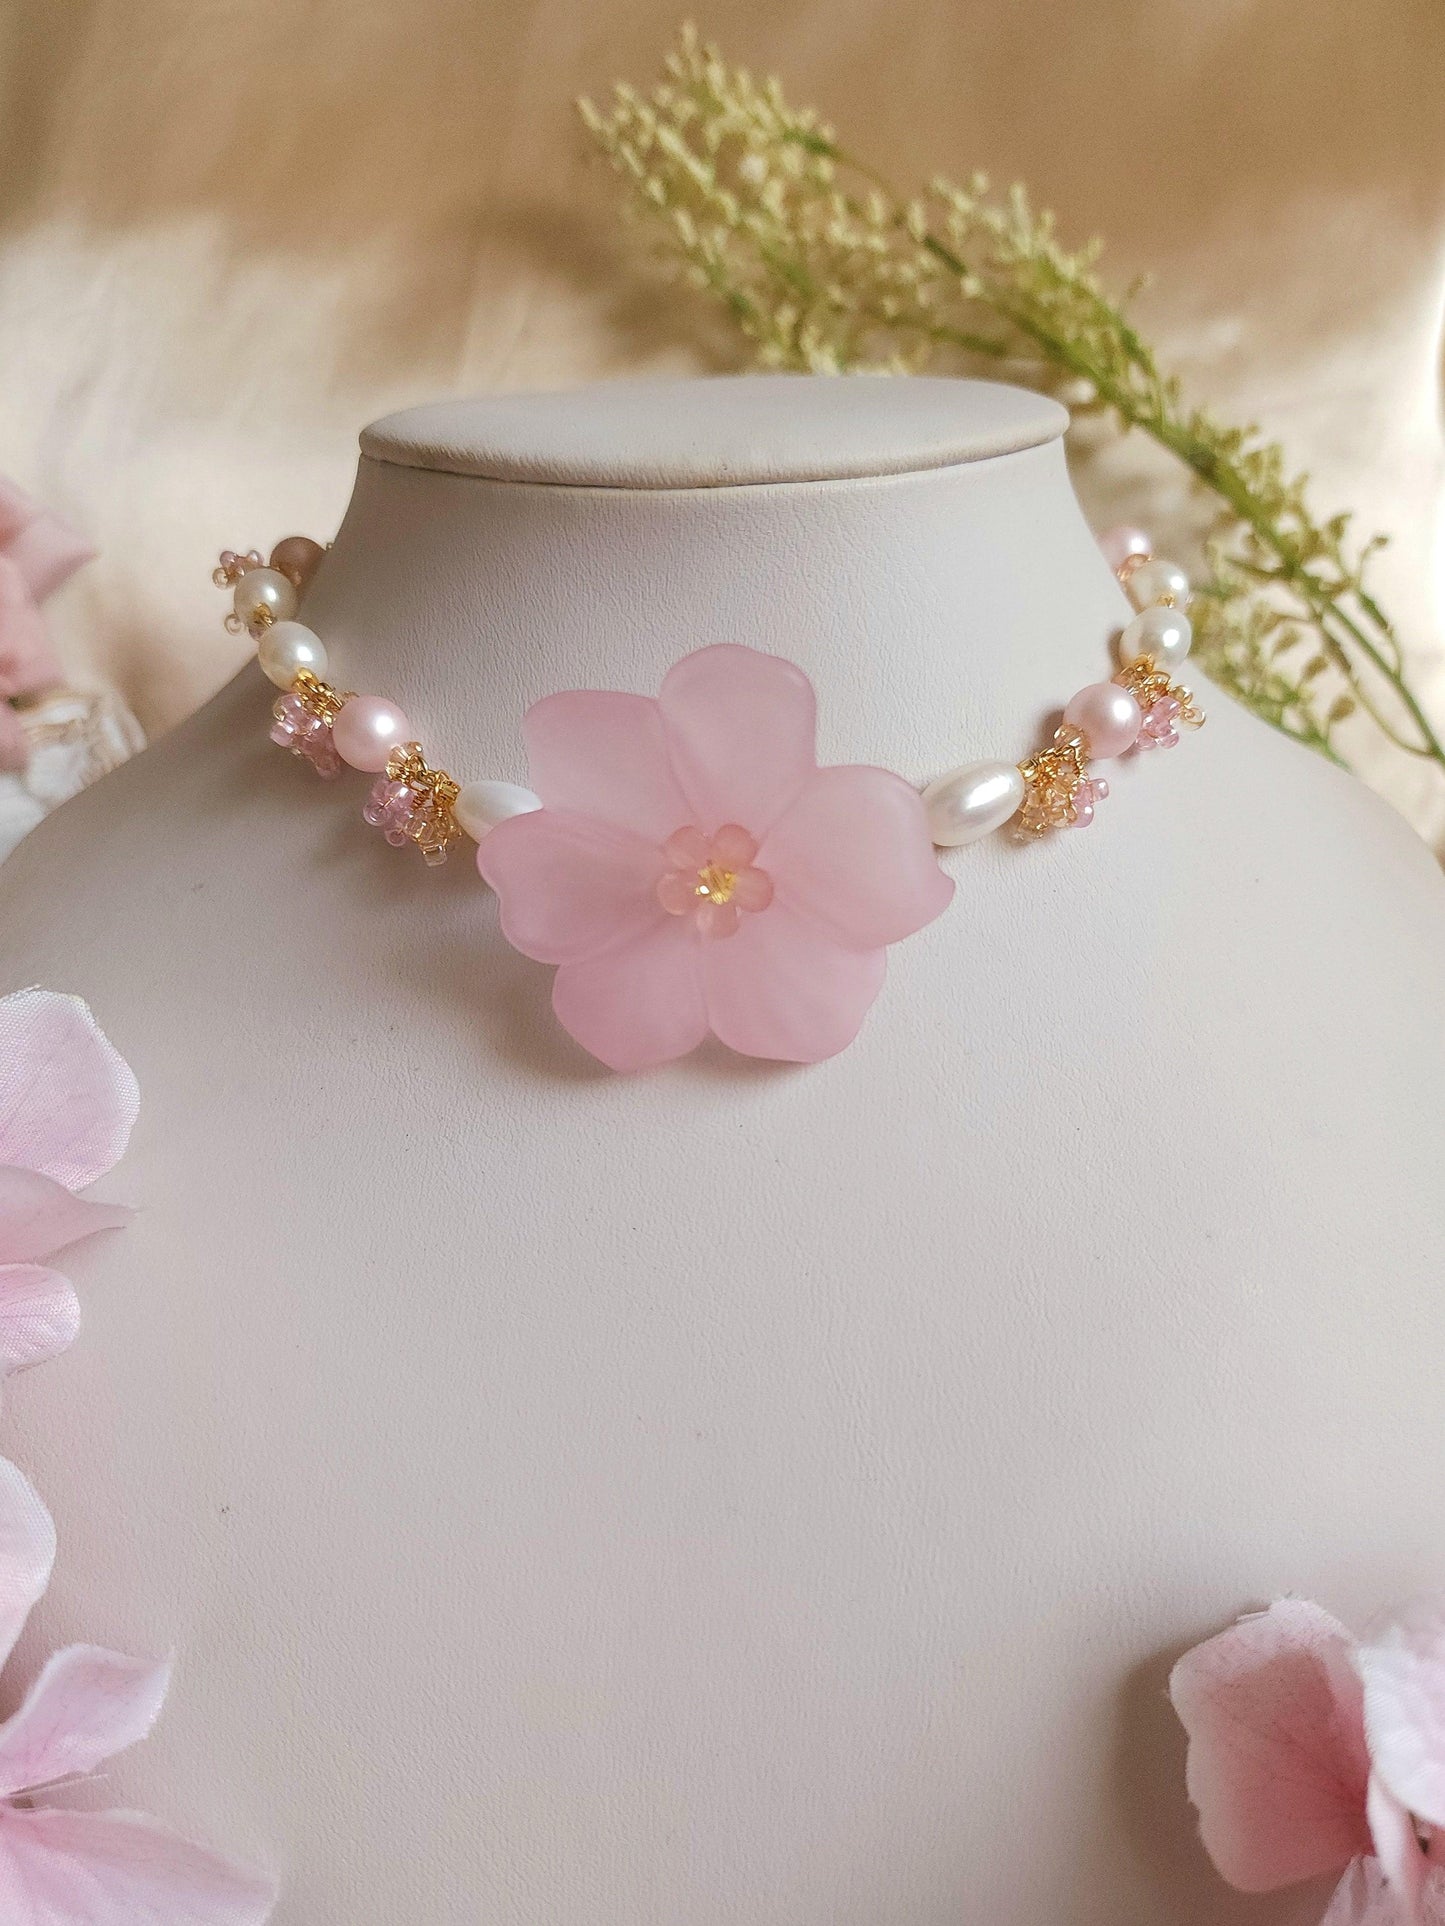 The Lady's Camellia Pearl Choker - By Cocoyu